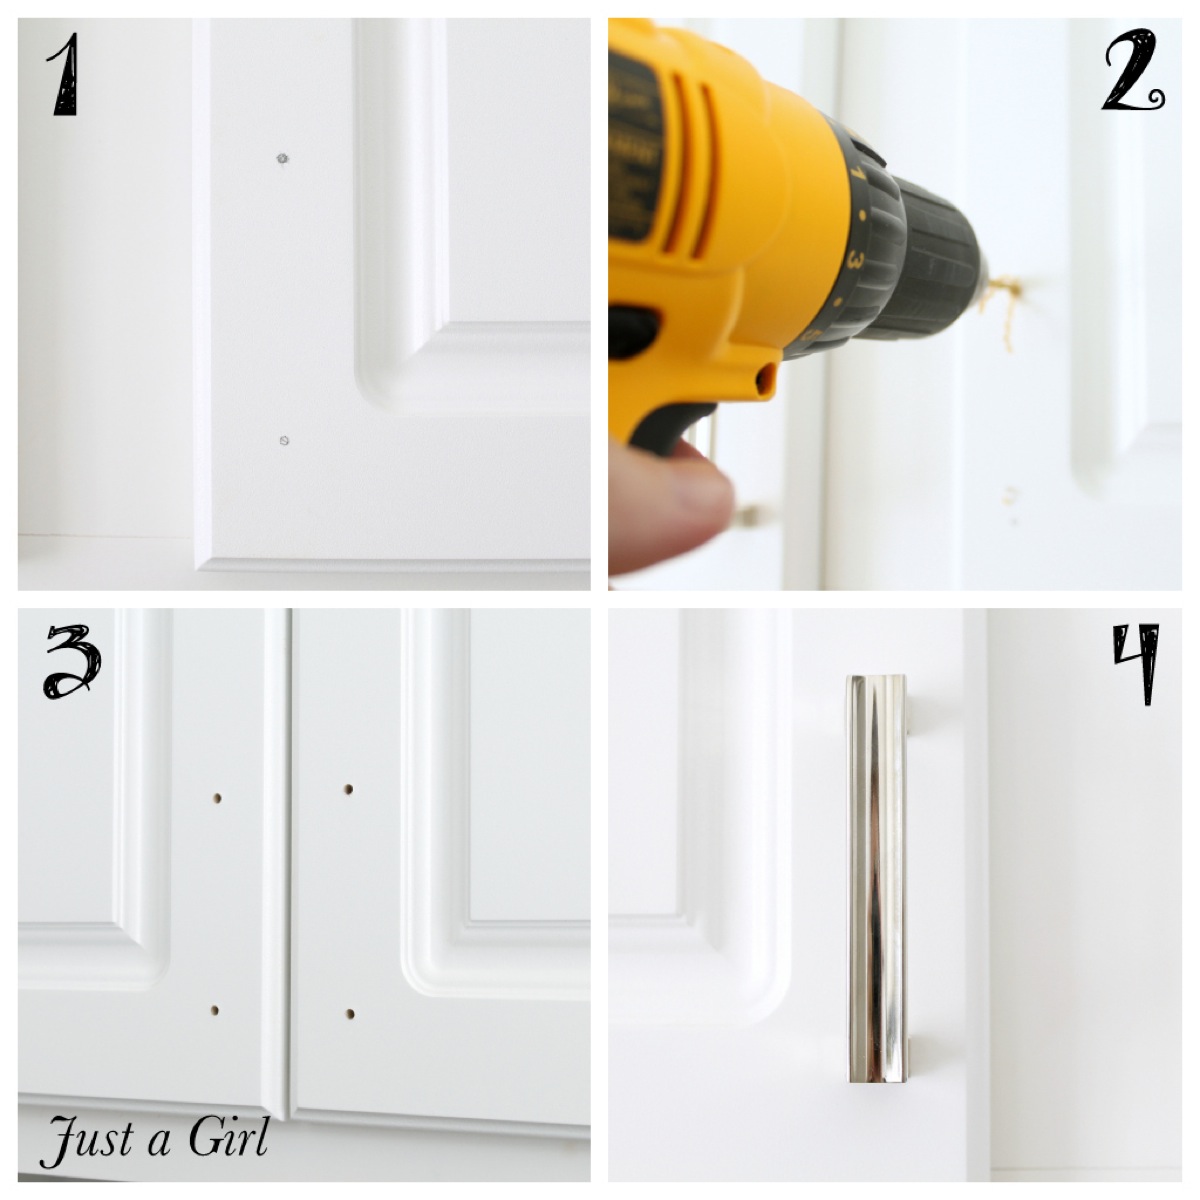 How To Install Cabinet Hardware Just, Mounting Cabinet Hardware